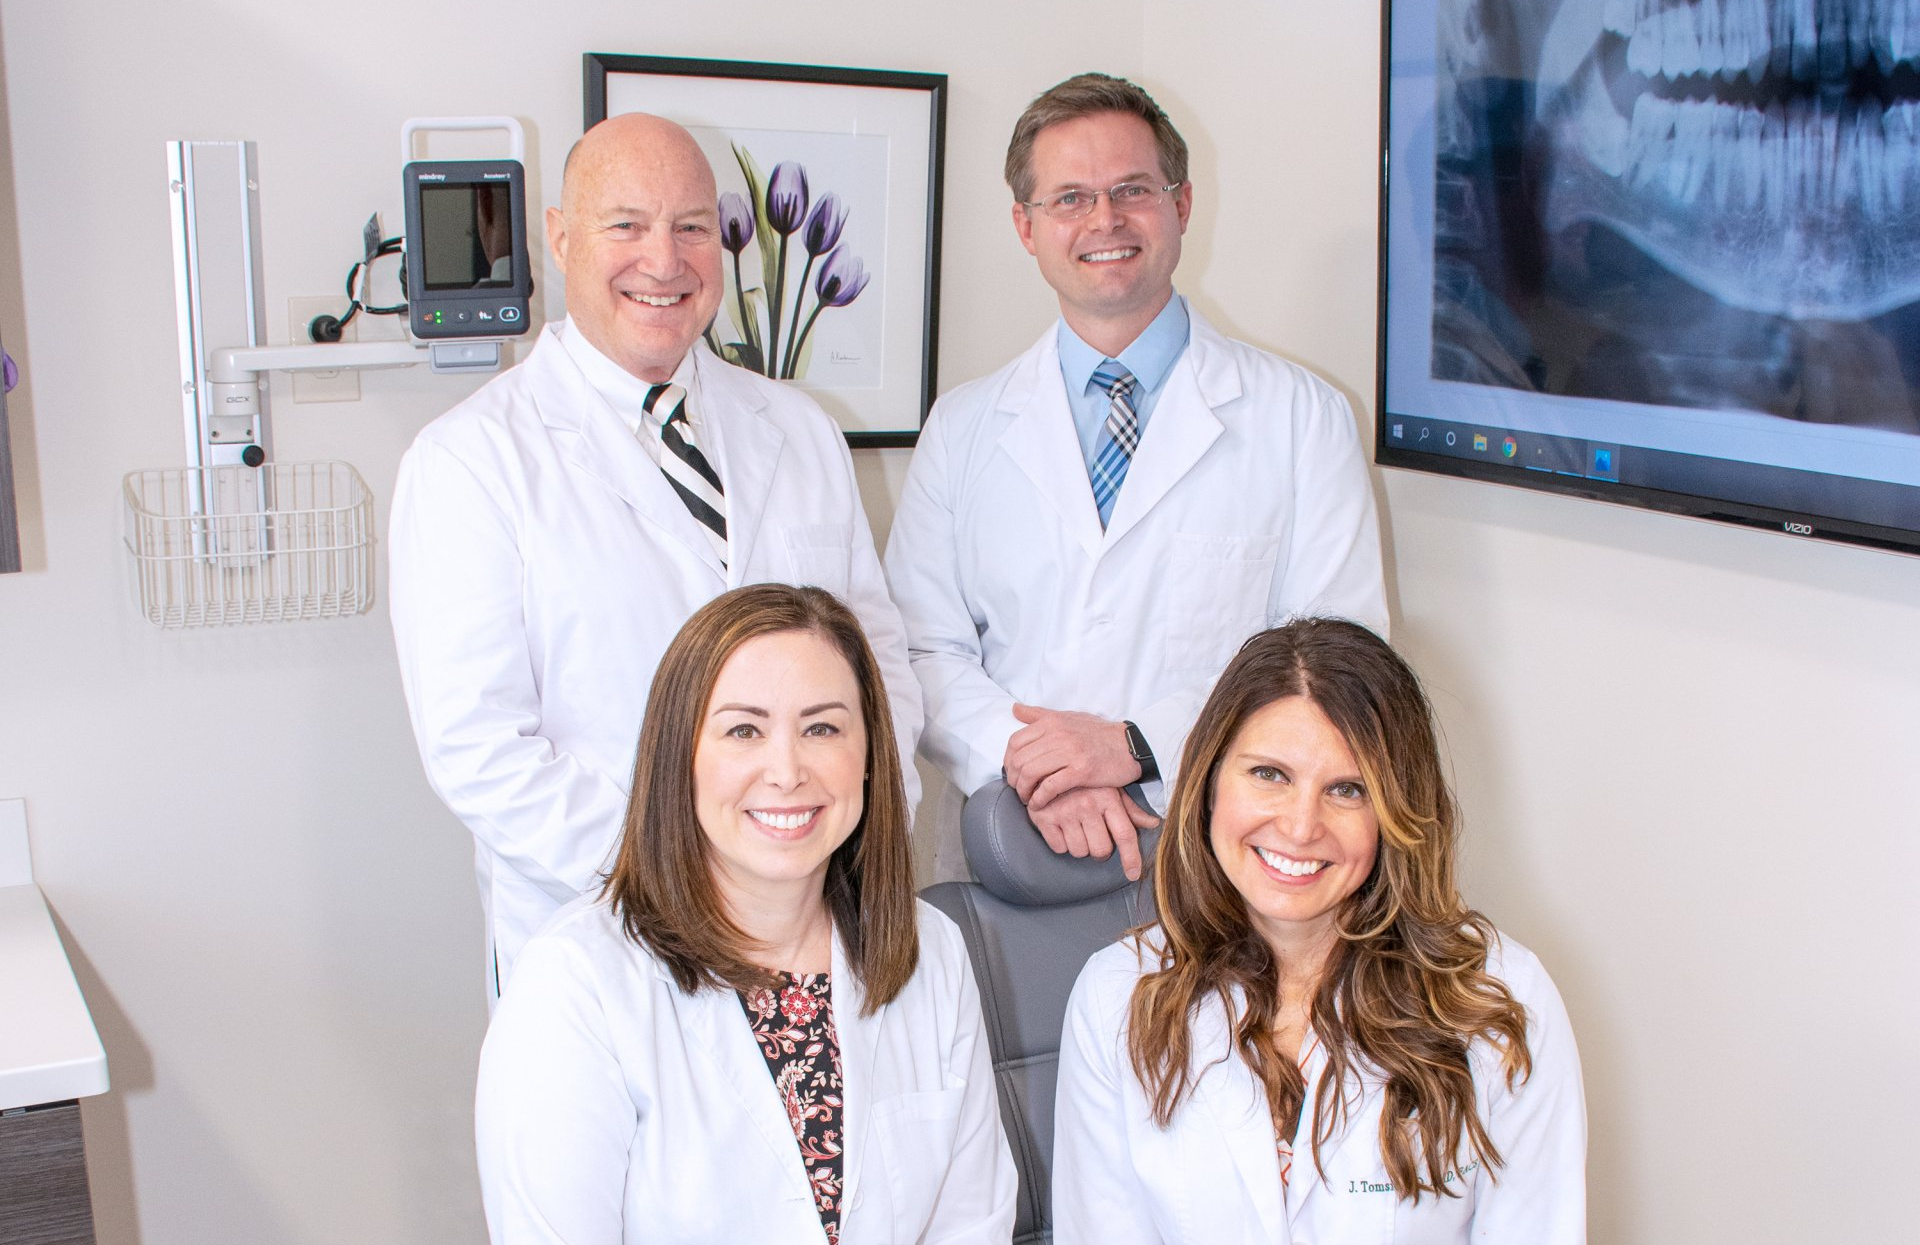 Ohio’s Center for Oral, Facial and Implant Surgery